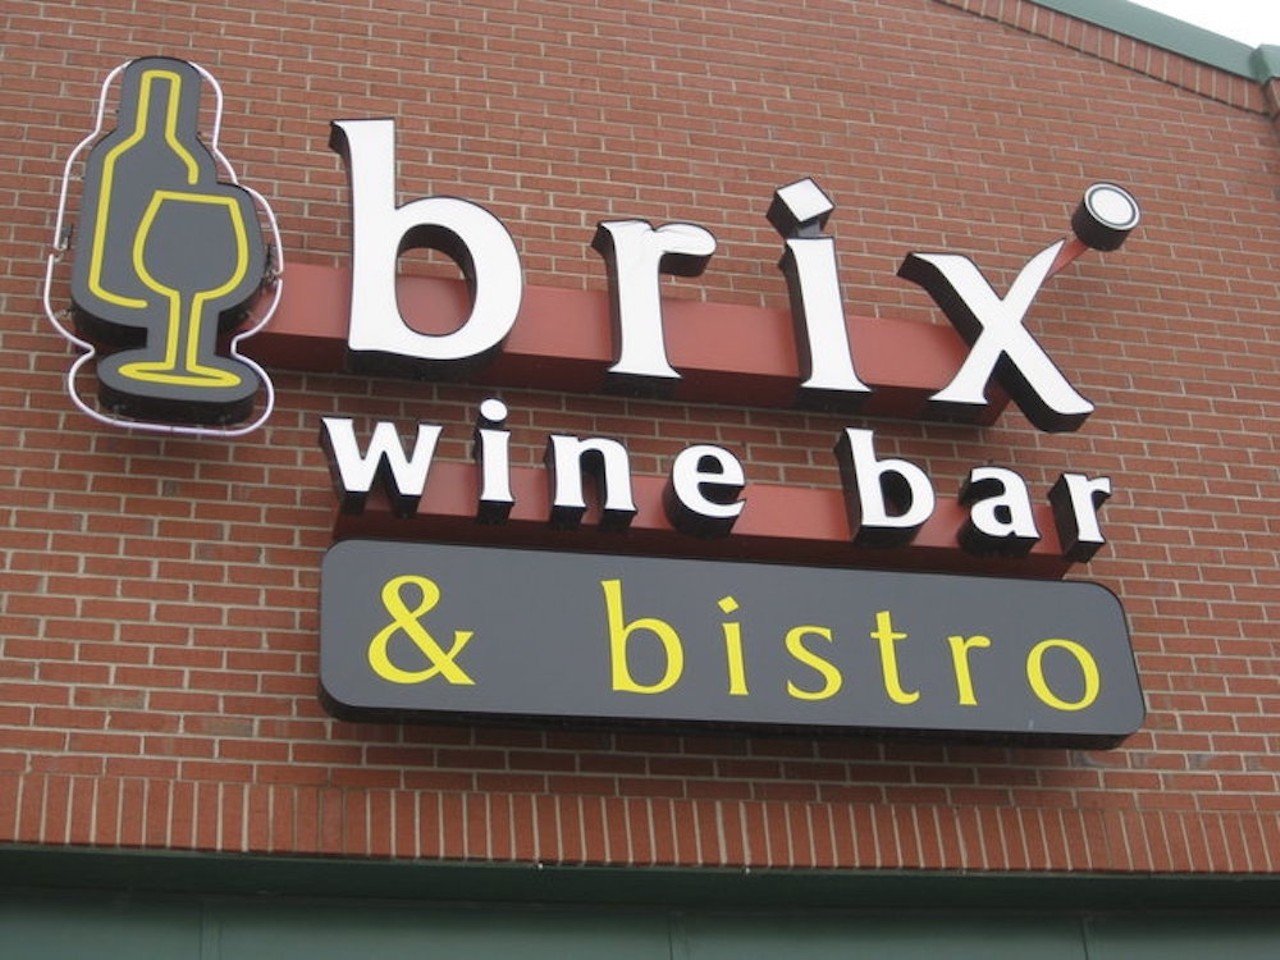 Brix Wine Bar
12418 La Grange Road
Here&#146;s one that really fits the term &#147;hidden gem&#148;: a wine bar in a strip mall. Brix features a large selection of wine and a few, carefully selected entrees, appetizers and salads. This low-lit restaurant is perfect for a surprise date night.
Photo via facebook.com/Brix-Wine-Bar-and-Bistro